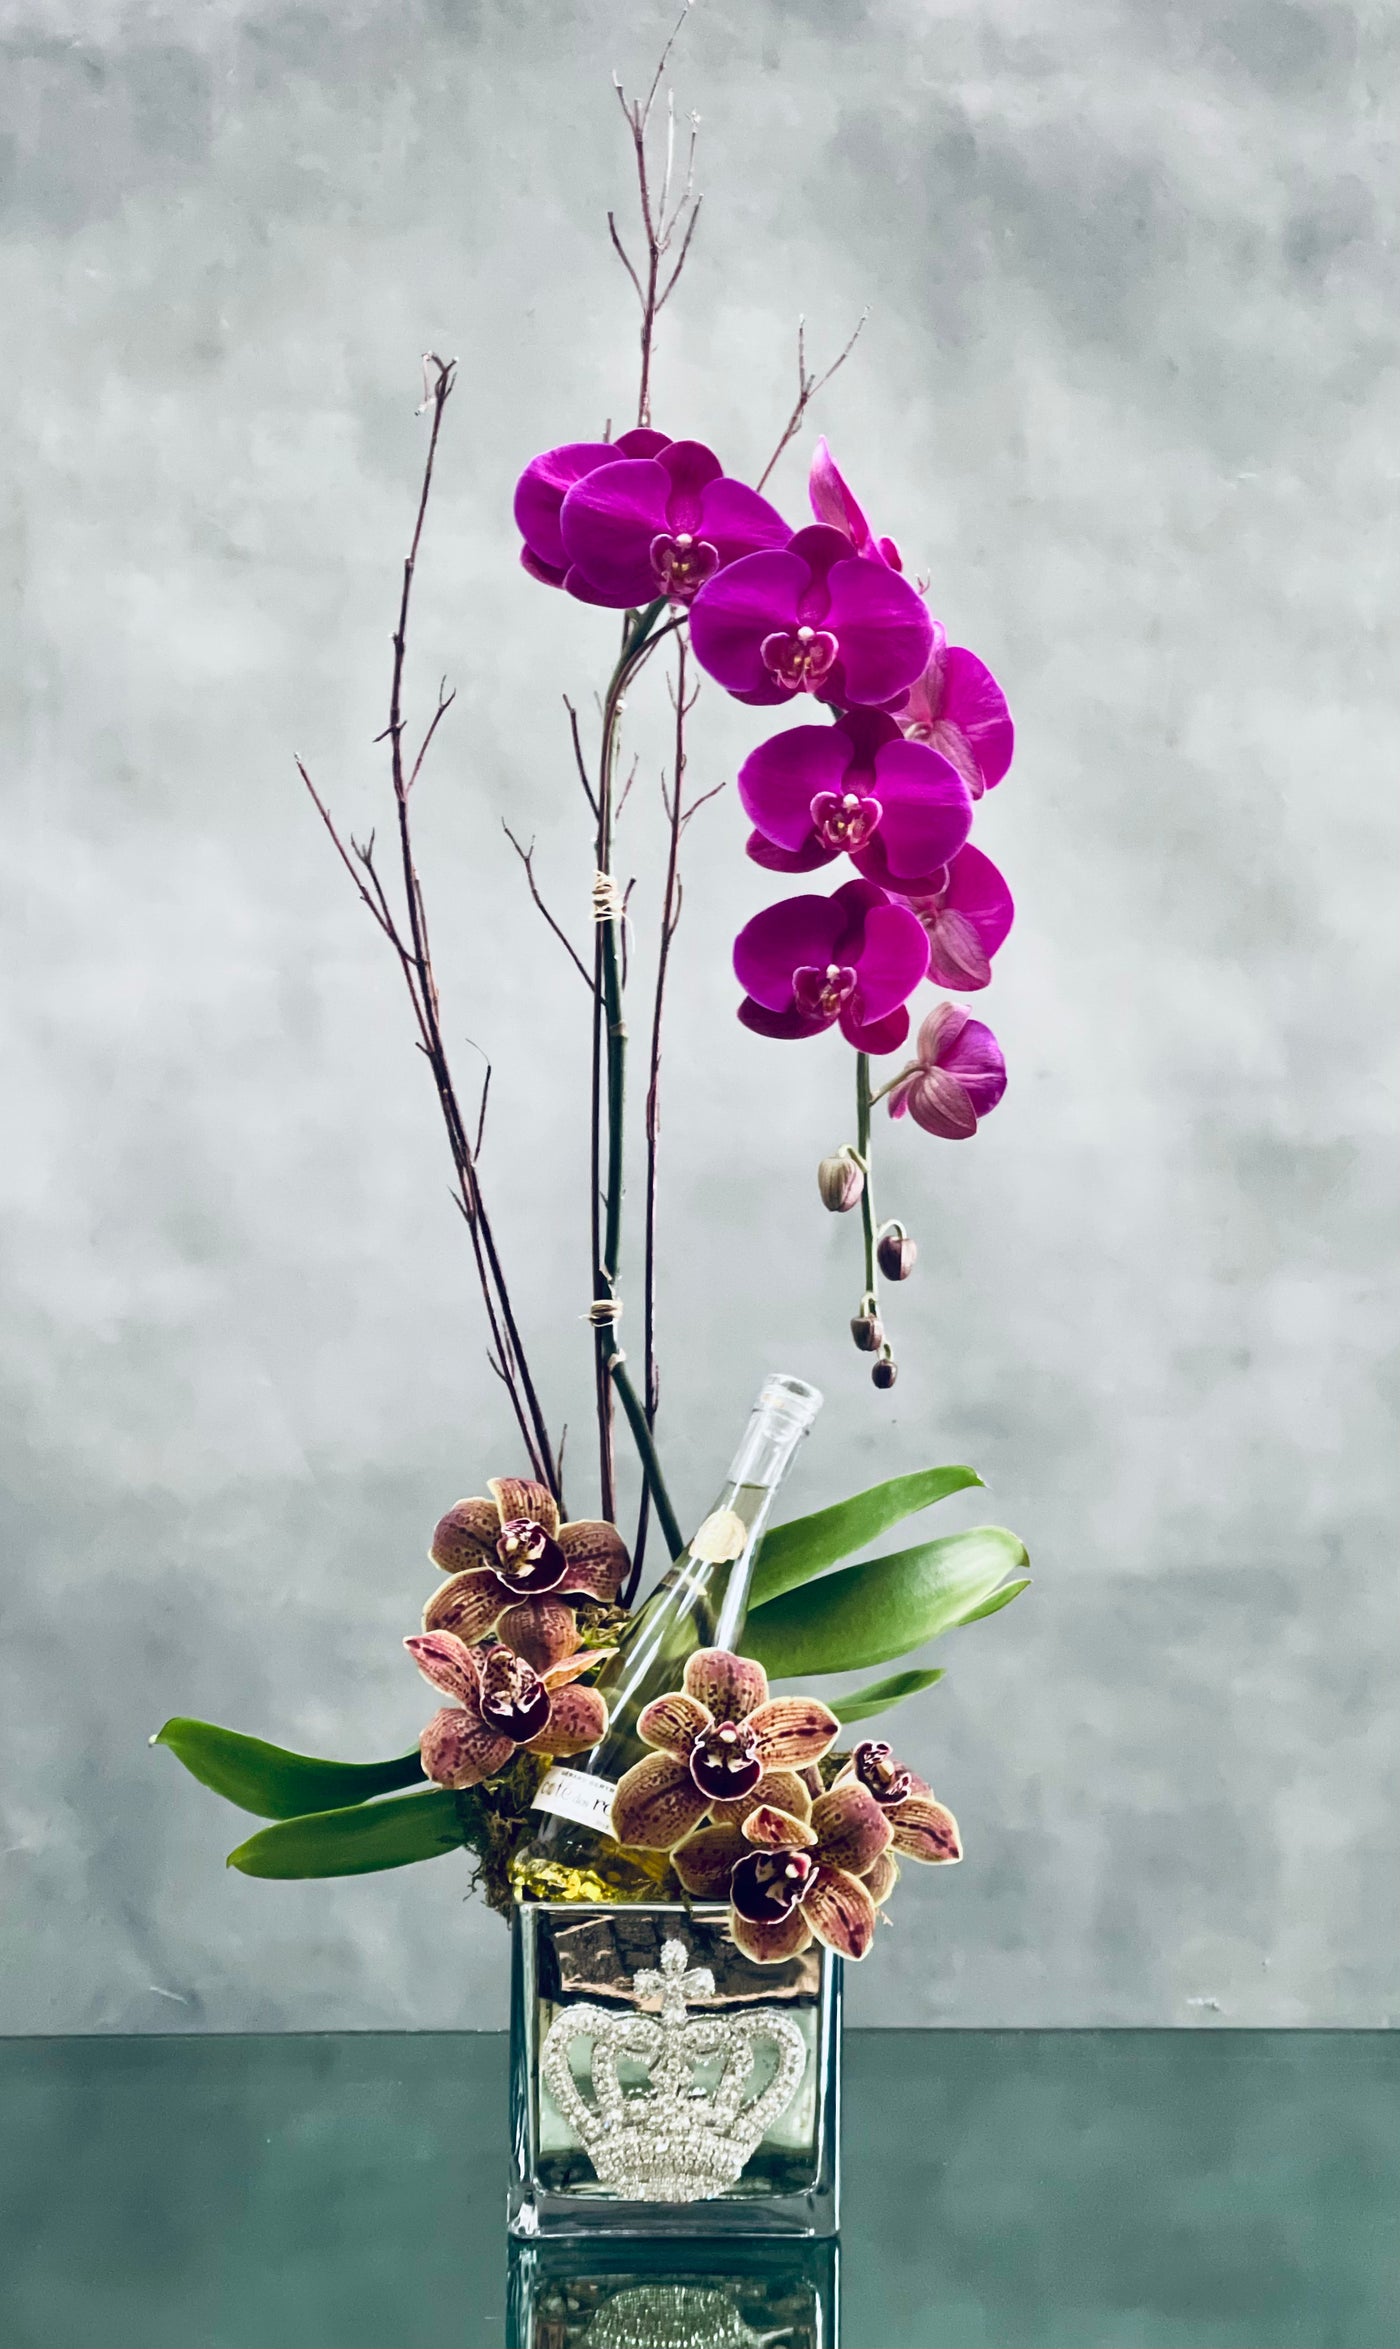 Beverly Hills Florist presents this duo orchid arrangement for same day delivery ! Our team has created can be made and sent out on the same day ! Beverly Hills Florist placed Amethyst cascading orchid with Cymbidium orchids and a half bottle Cotes de Roses Chardonnay are nested in a crown jeweled vase. A wonderful Love and Romance gesture. 